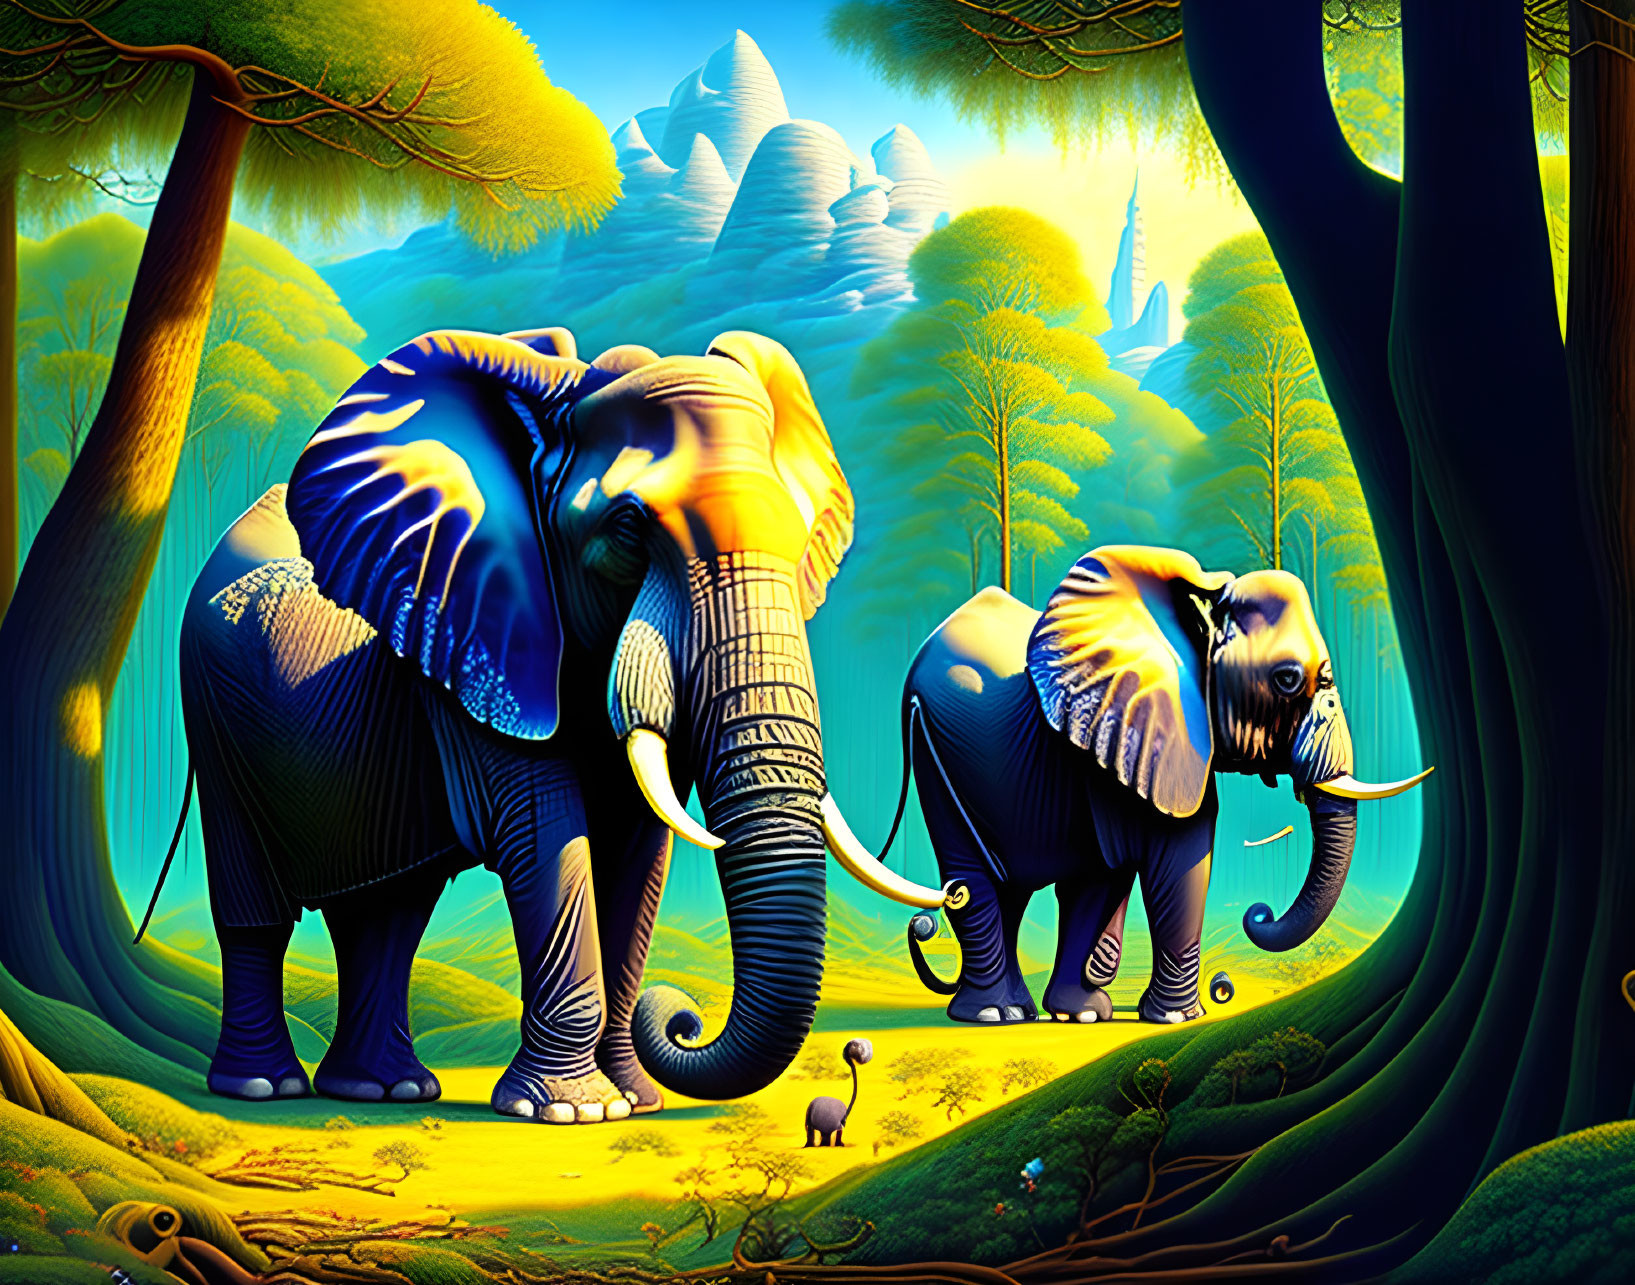 Stylized elephants in vibrant, fantastical forest